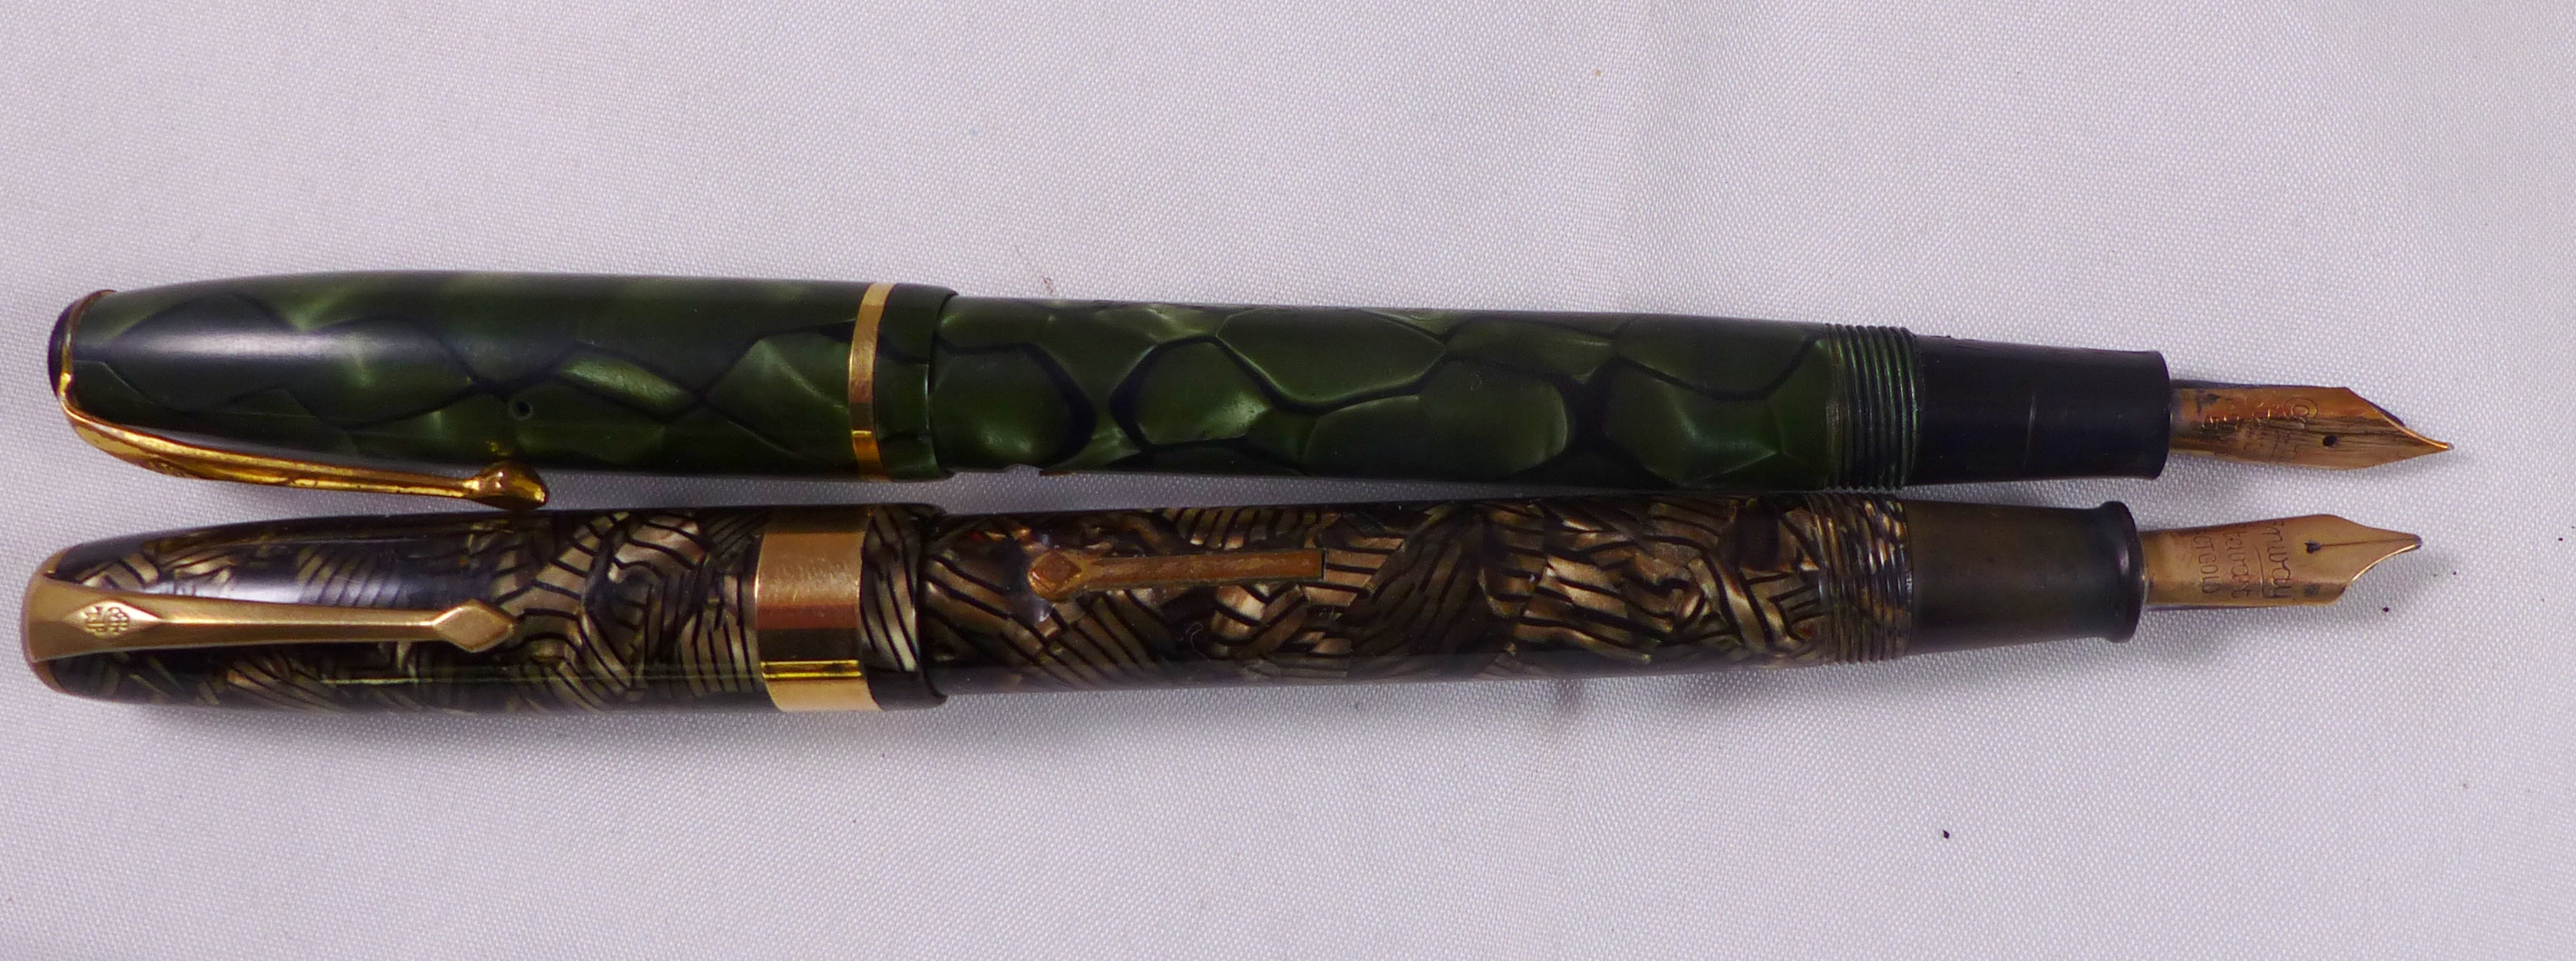 CONWAY STEWART FOUNTAIN PENS. Two Conway Stewart fountain pens with 14ct gold nibs, numbers 15 and